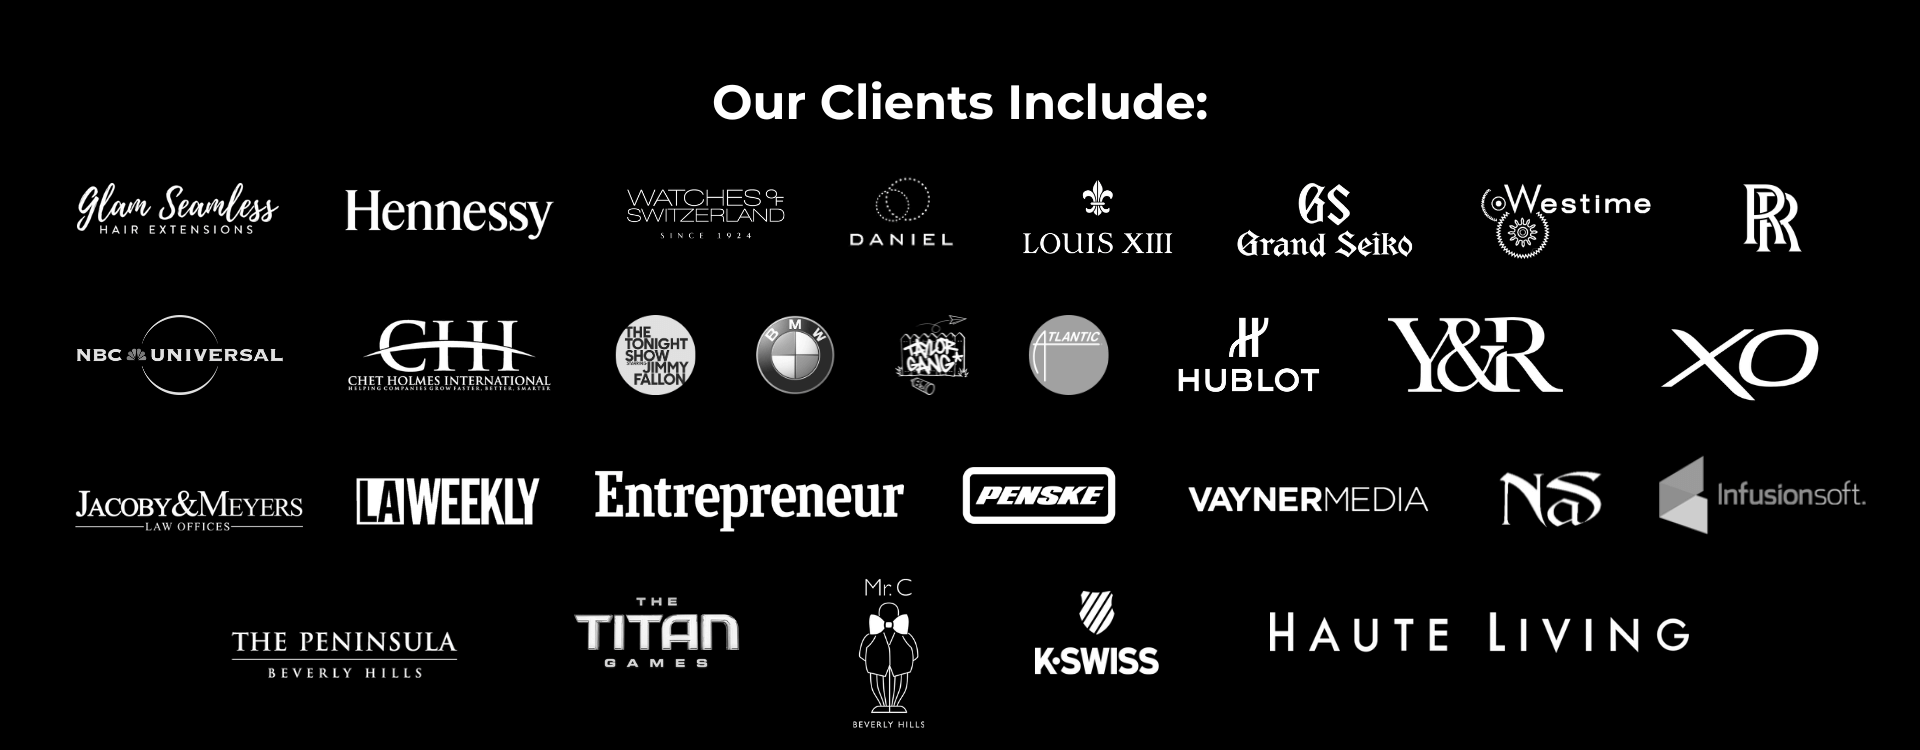 Clients We Have Worked With